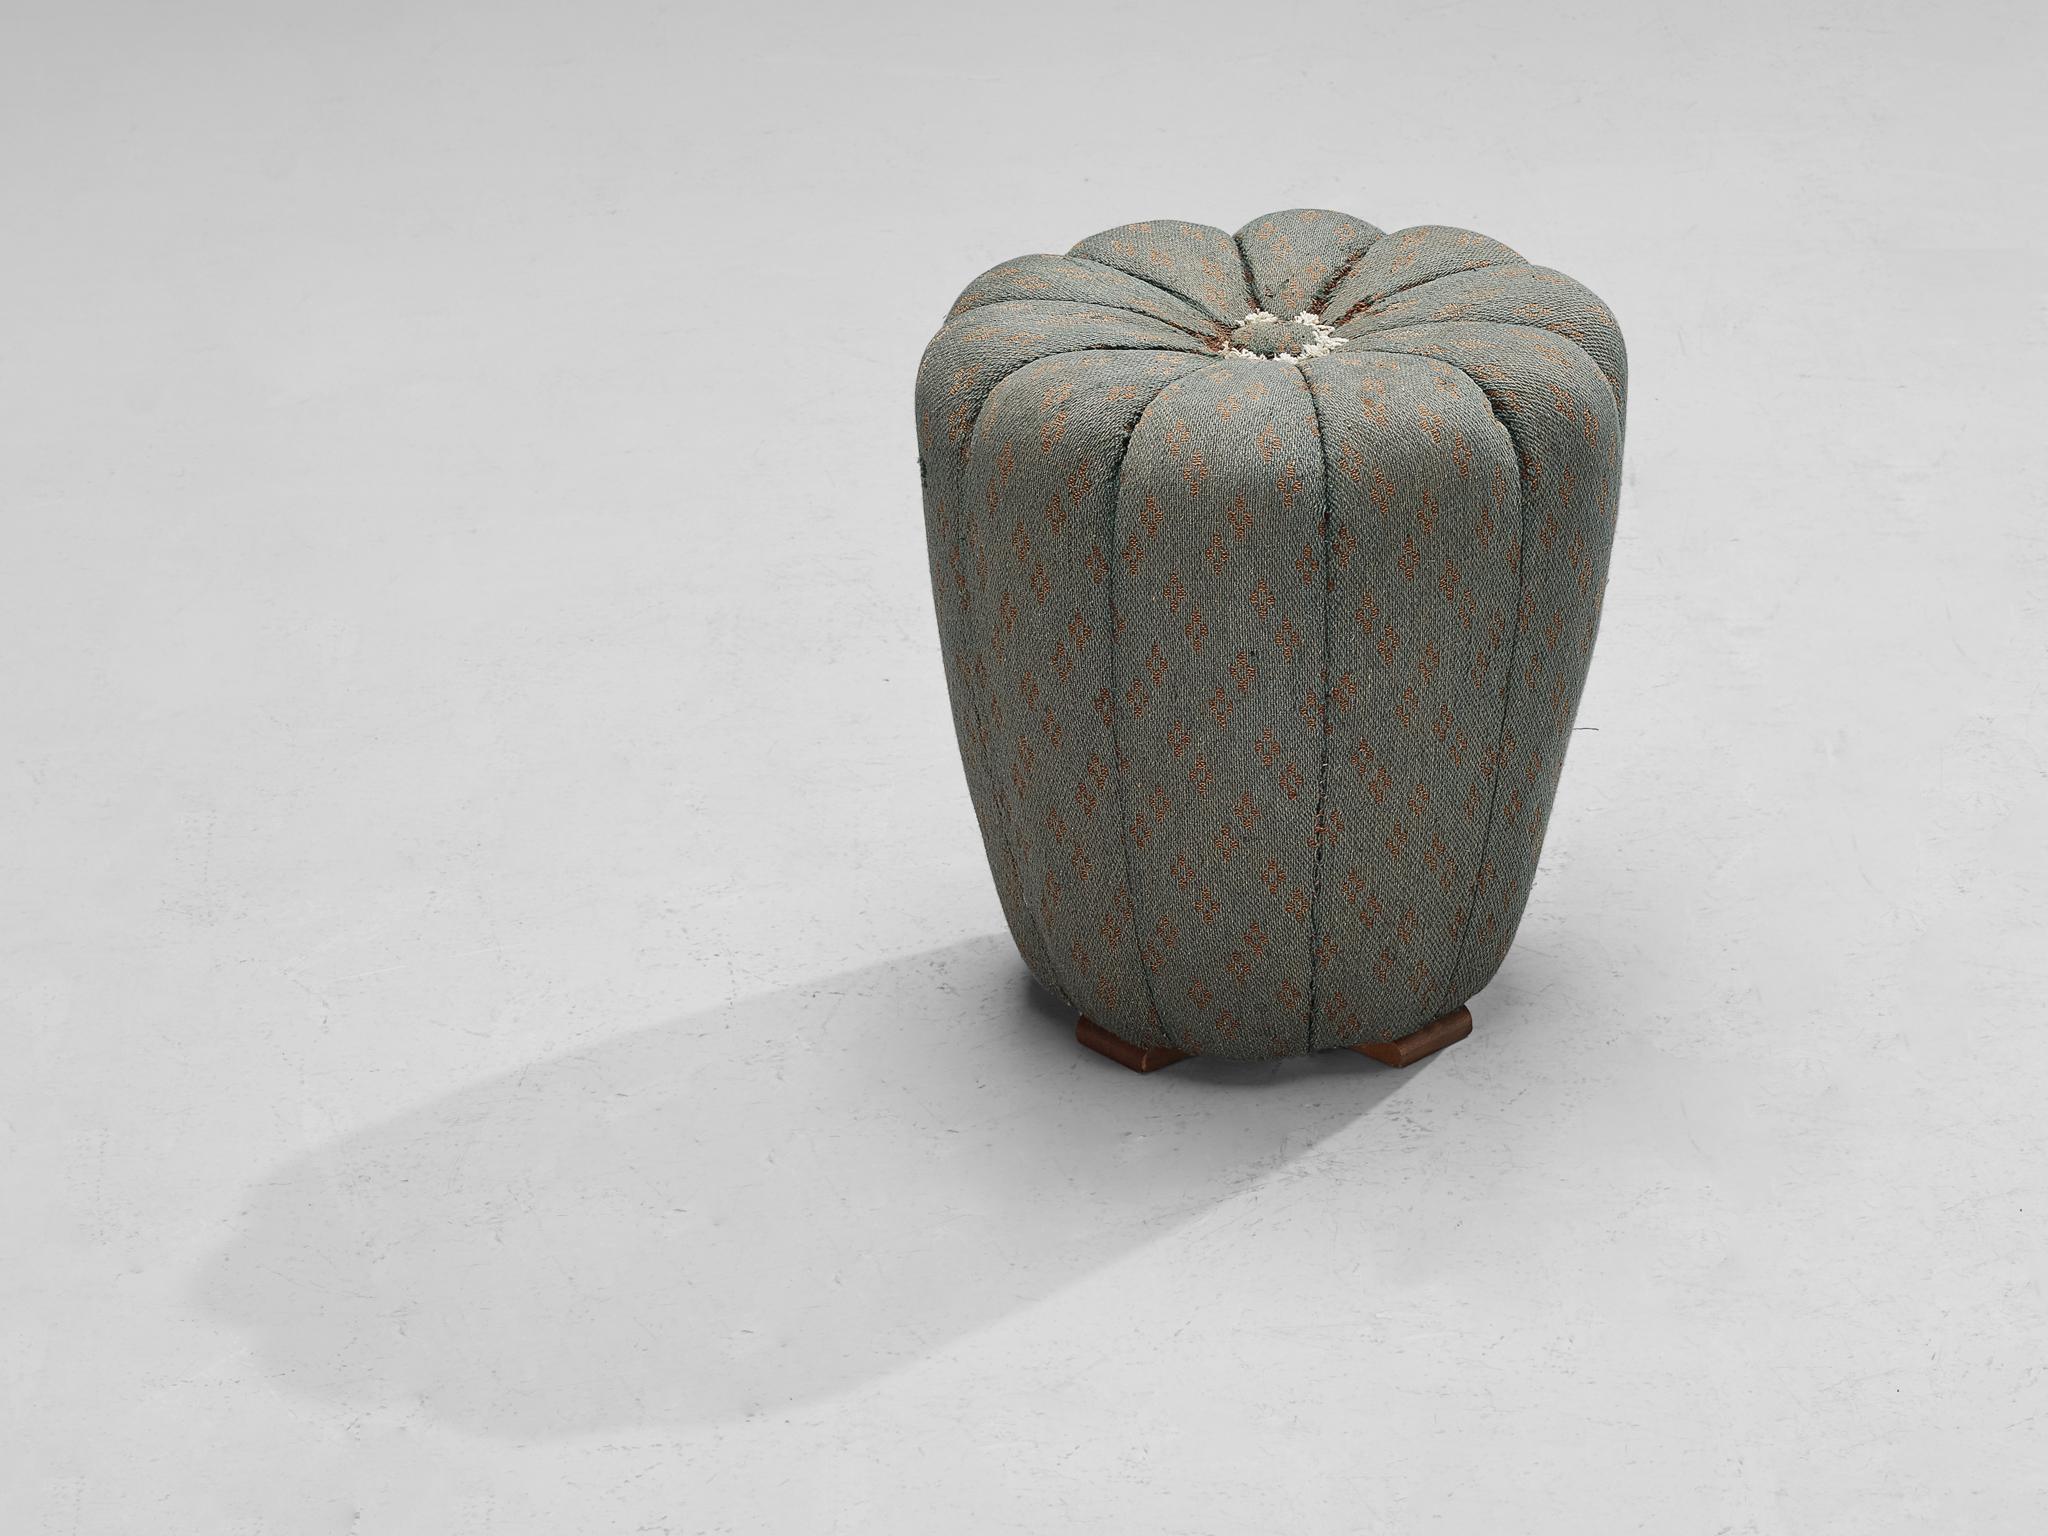 Jindrich Halabala for UP Závody, footstool, tabouret, ottoman, fabric, wood, Czech Republic, 1930s.

This poetic pouf is designed in the 1930s when the Art Deco Period was at its highest point and distinguishes itself by means of artistic upholstery